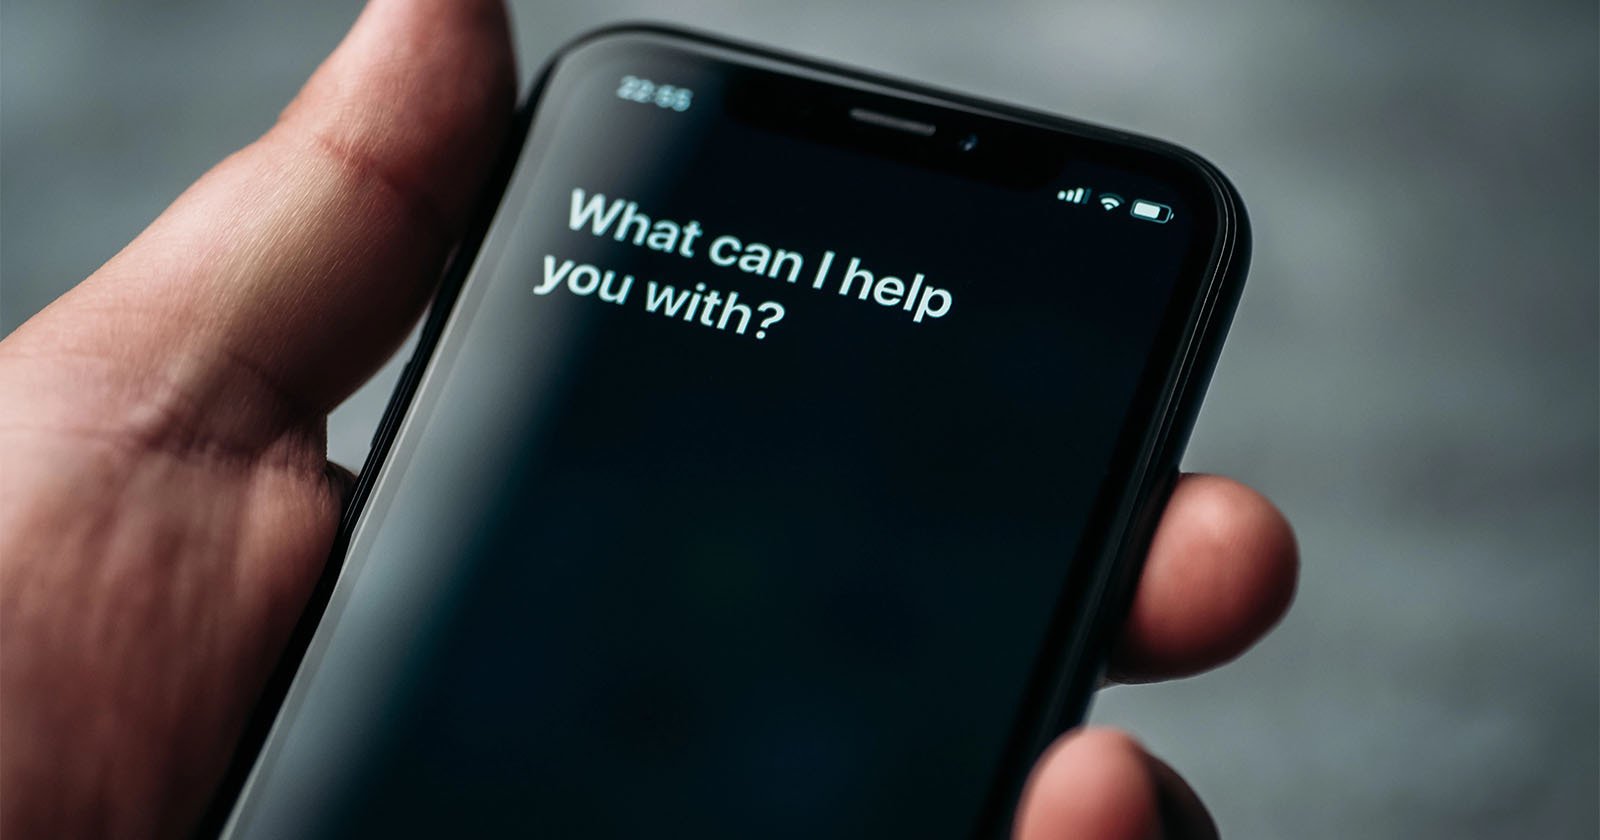 A Siri prompt on an iPhone asks, What can I help you with?